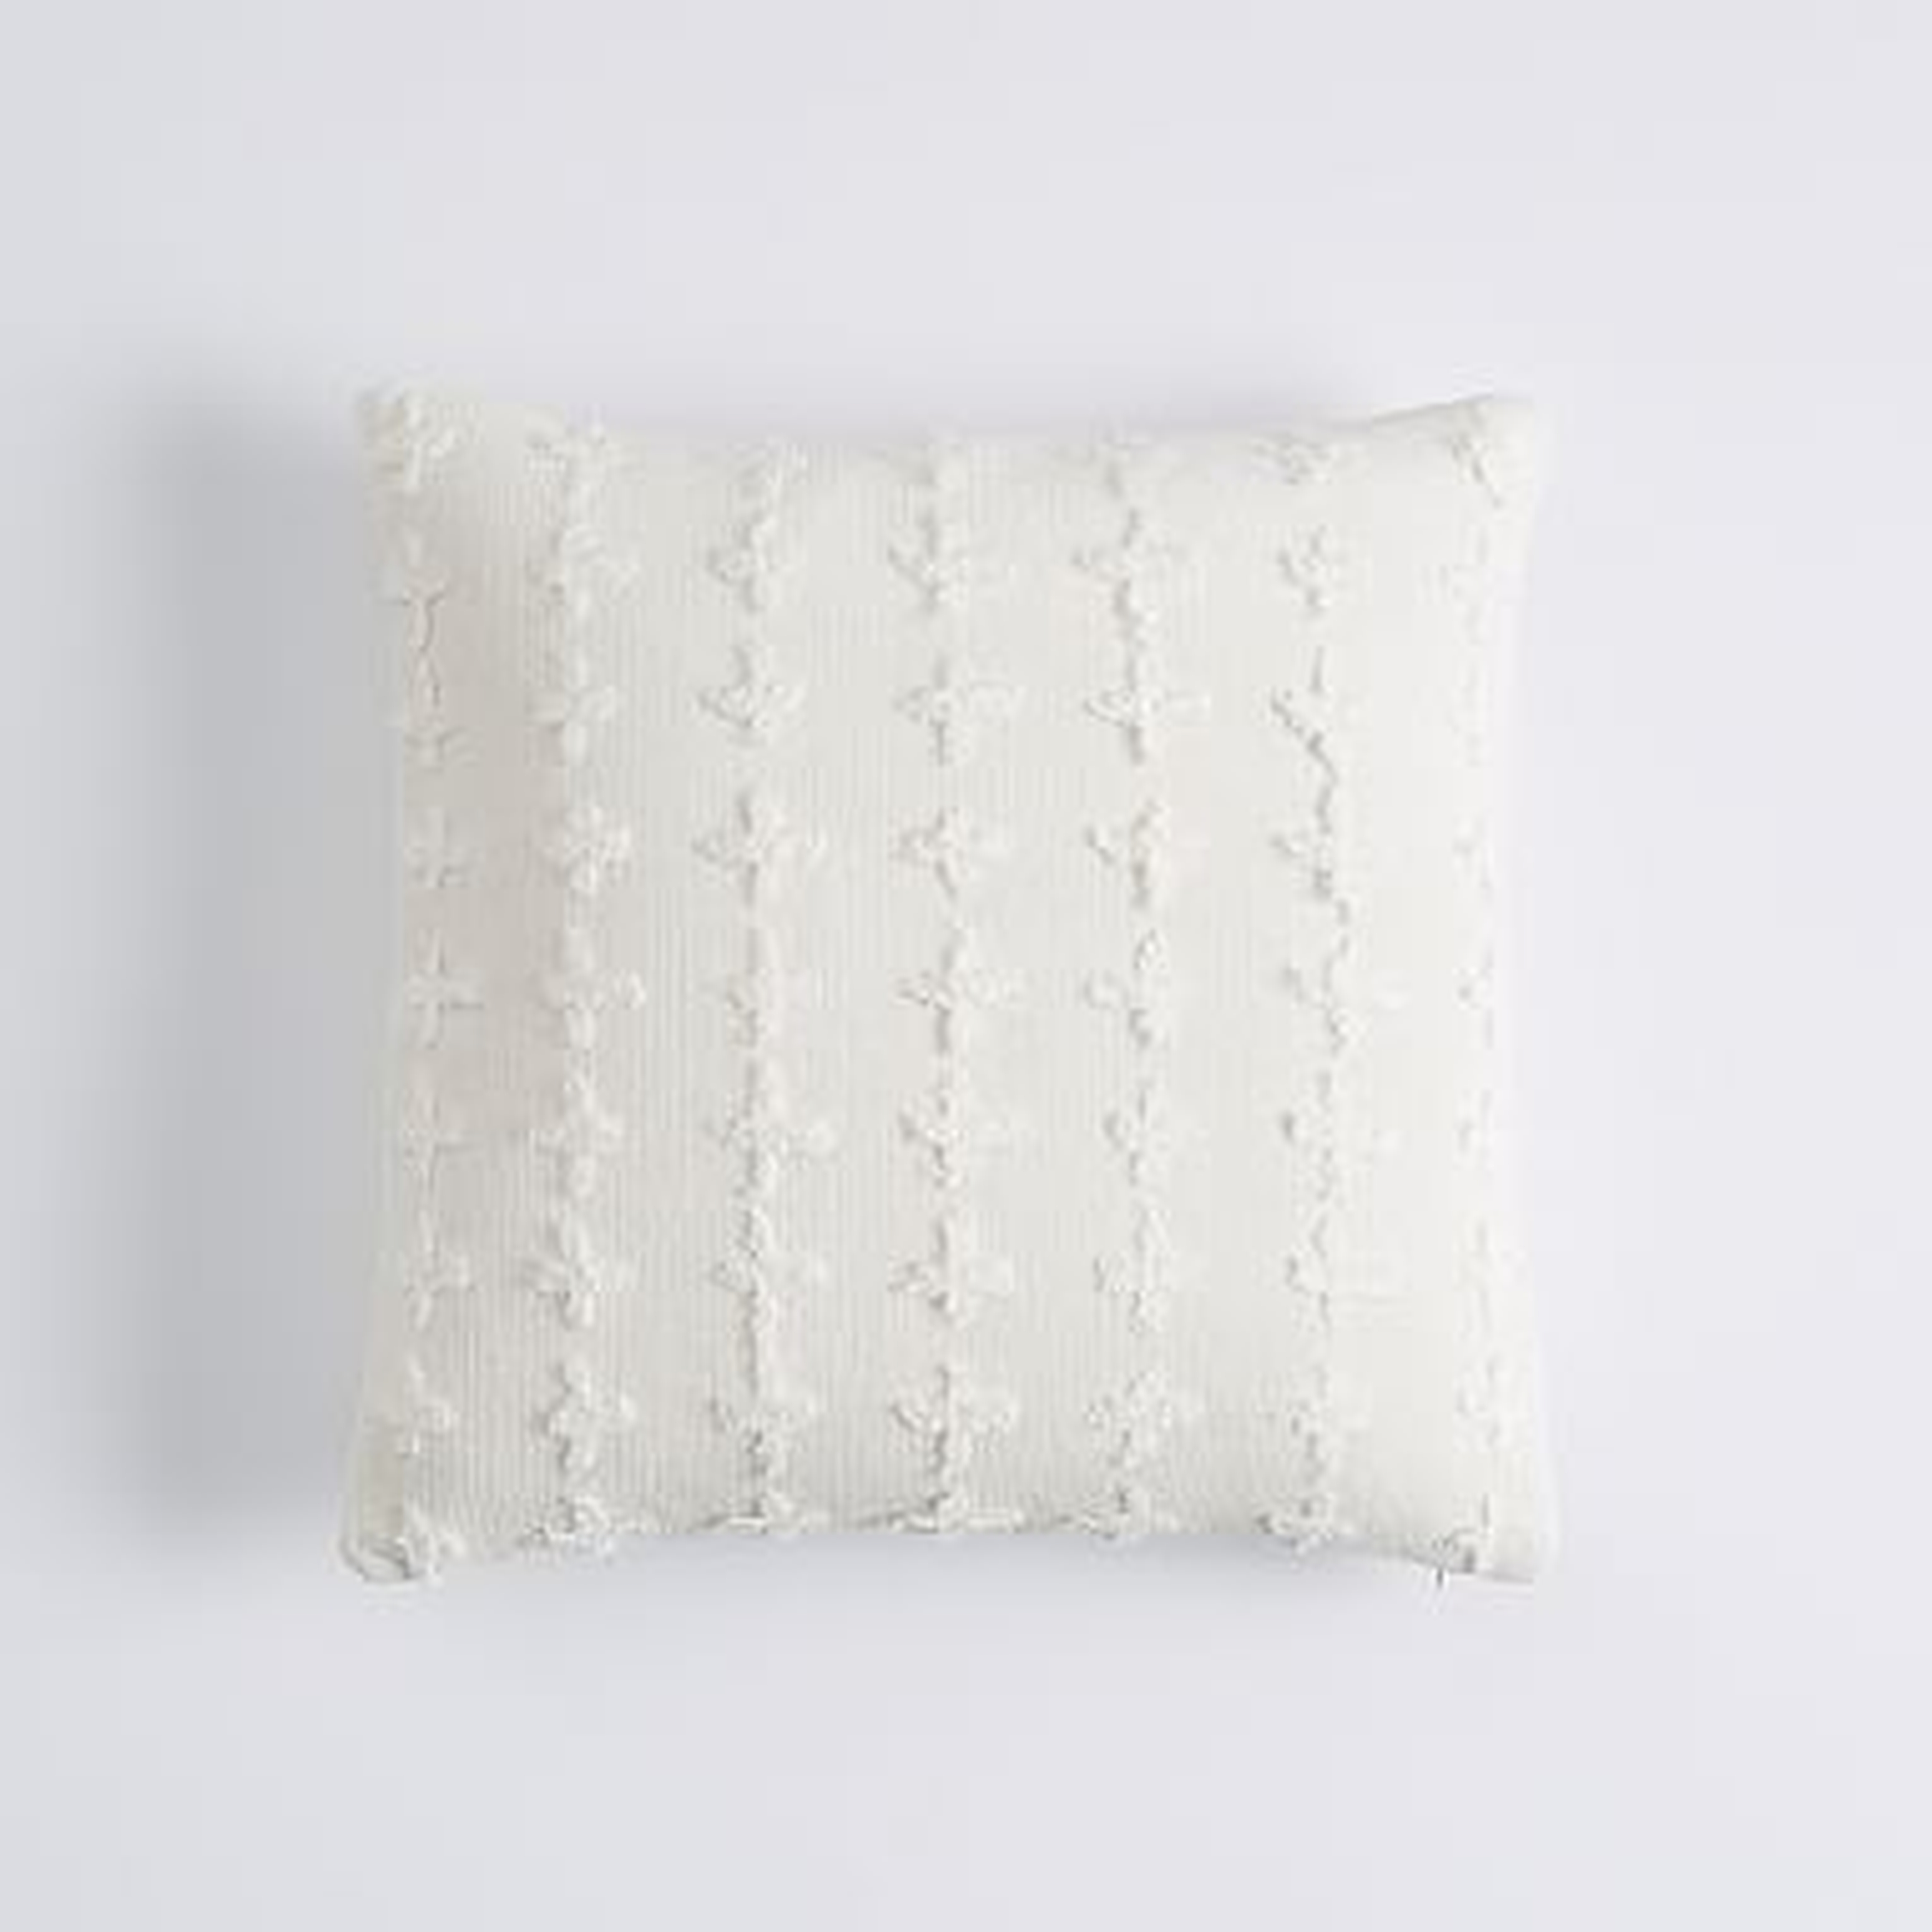 Soft Textured Pillow Cover, 18 x 18, Ivory - Pottery Barn Teen